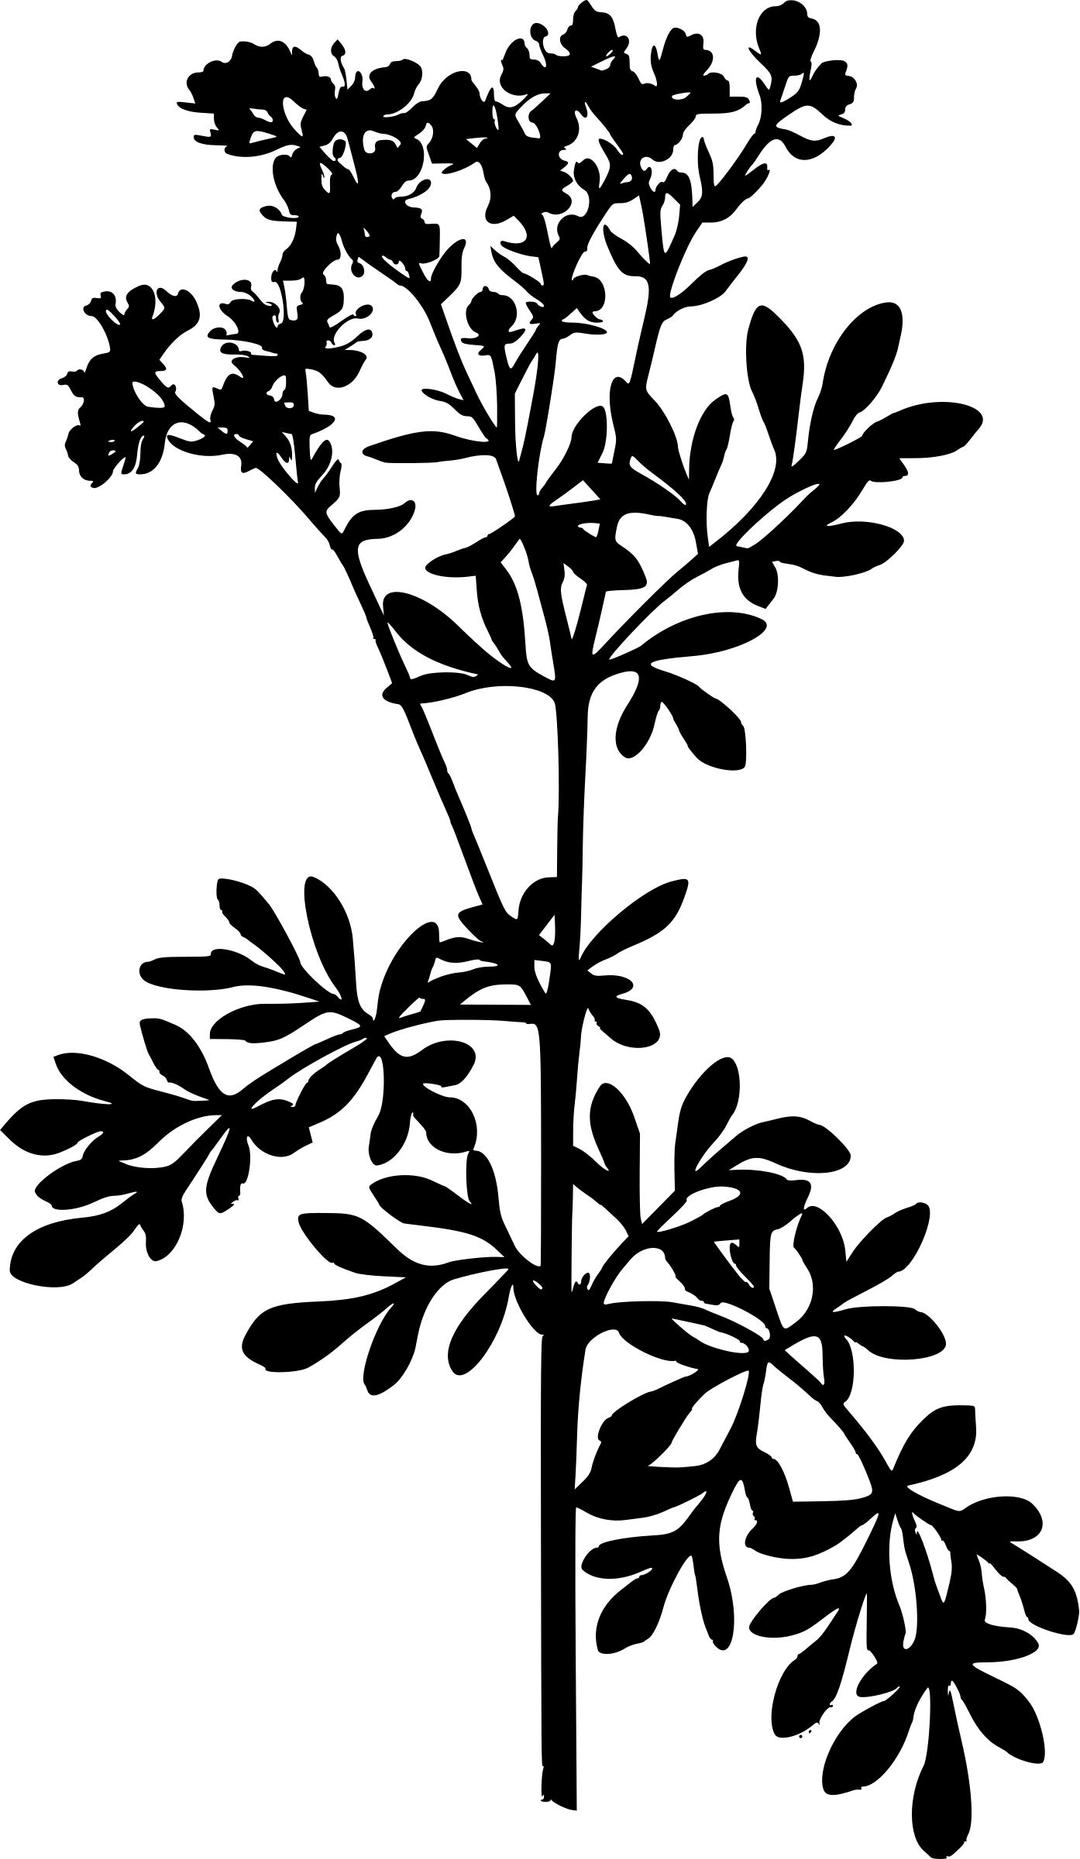 Common rue (silhouette) png transparent